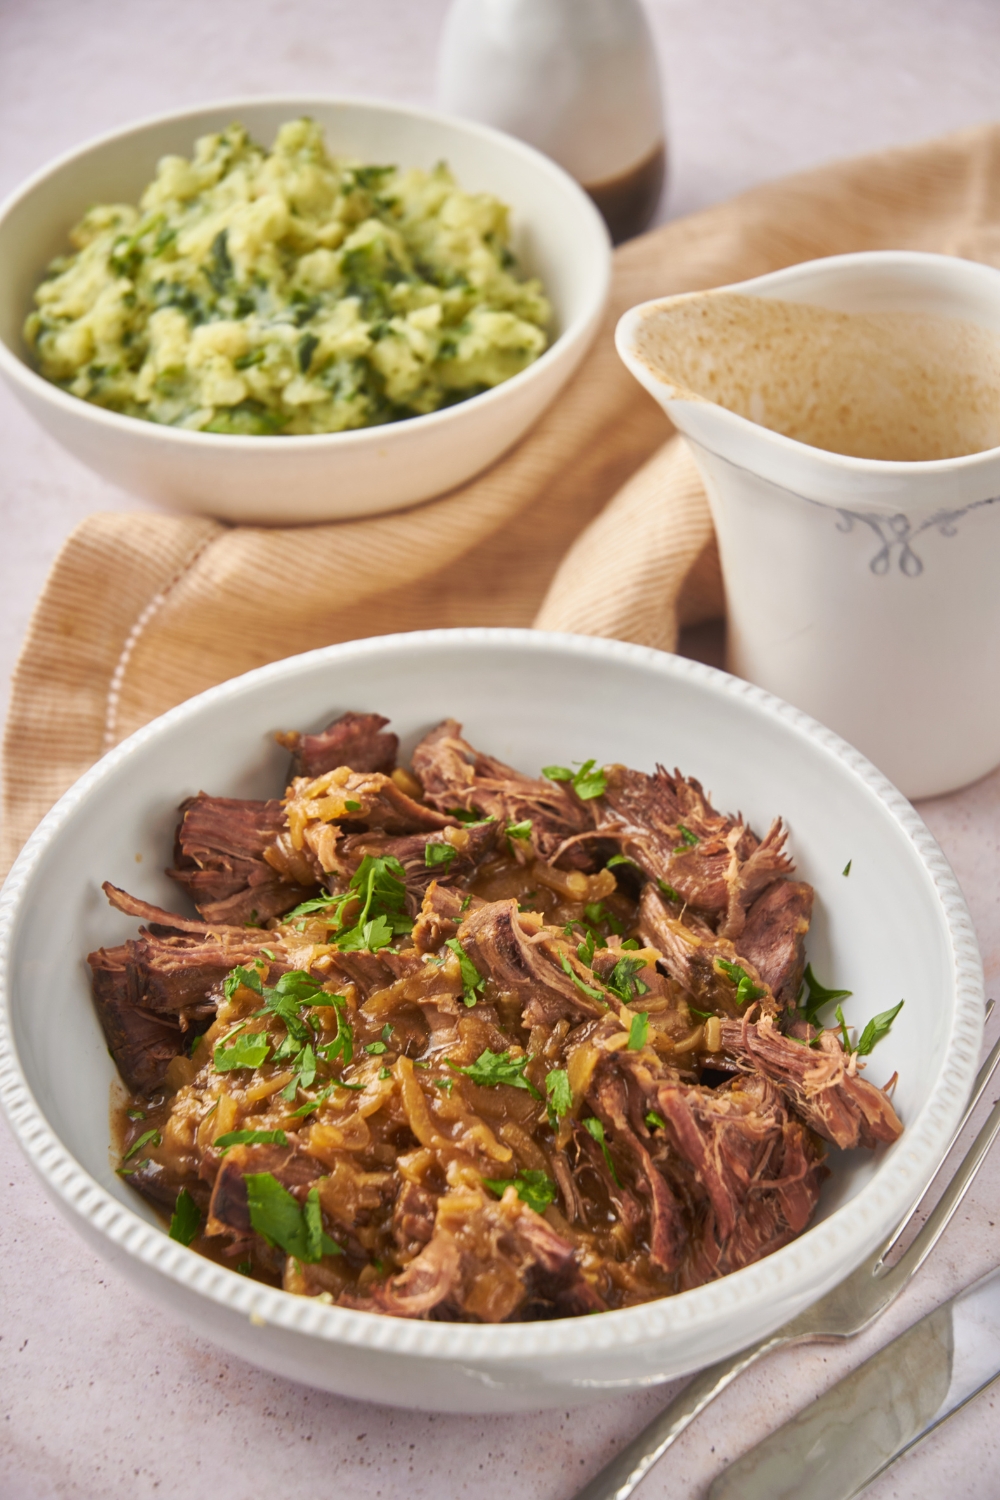 A bowl of cooked and shredded eye of round beef covered in a thin brown sauce and garnished with fresh green herbs.